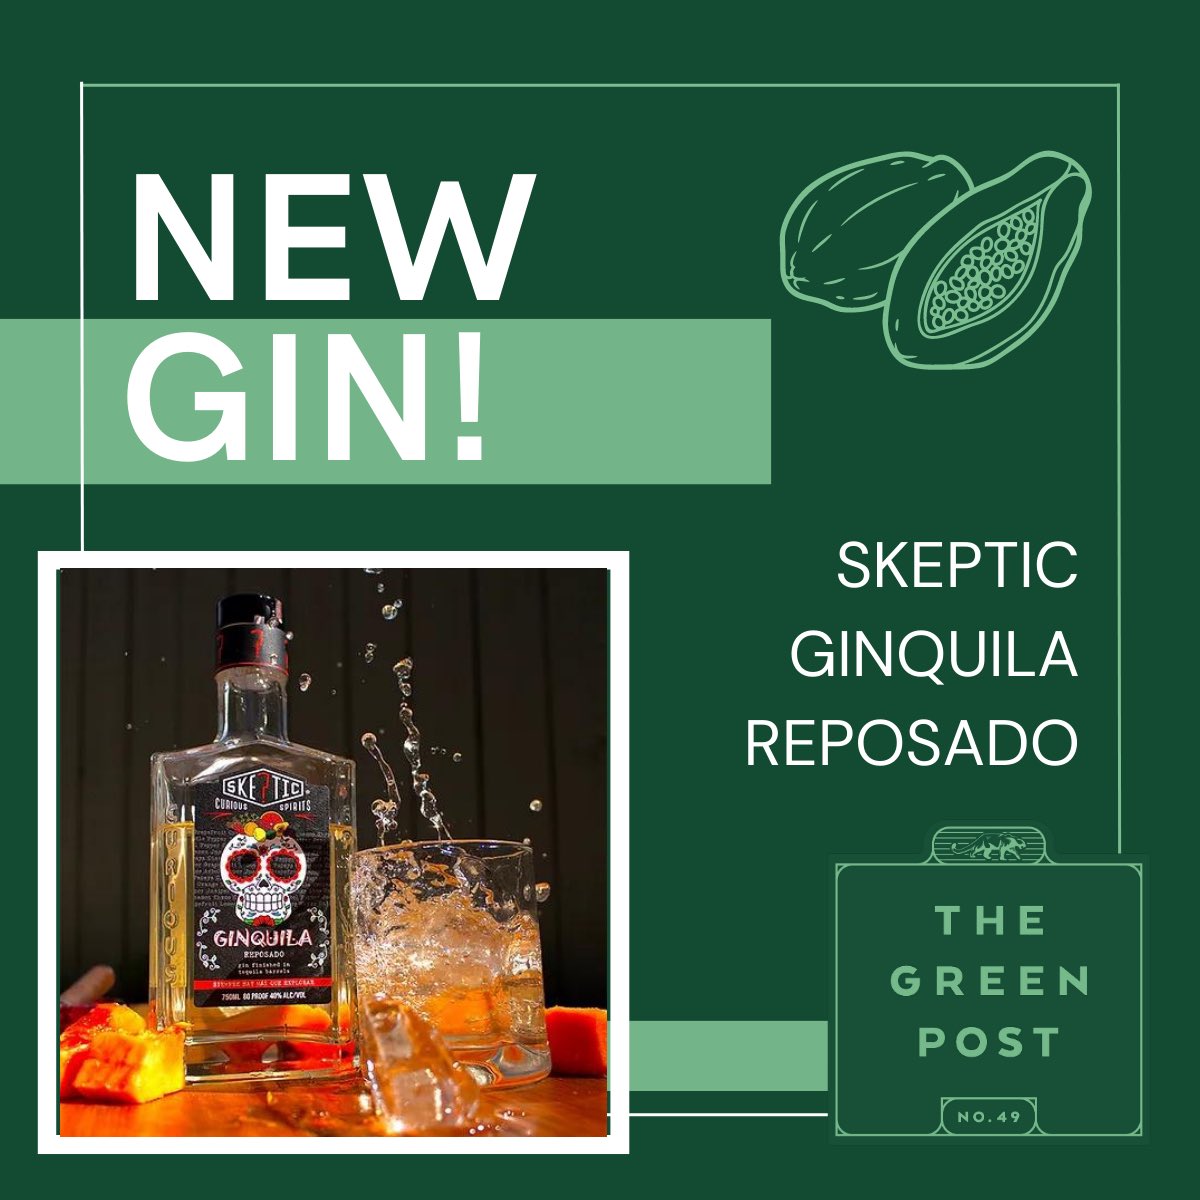 New Gin Alert!!!! Introducing Skeptic Ginquila Reposada - Happy Hump Day!

#greenpostcafe #greenpostpub #lincolnsquare #humpday #humpdayvibes #humpdaymotivation #ginlover #wednesday #happyhour